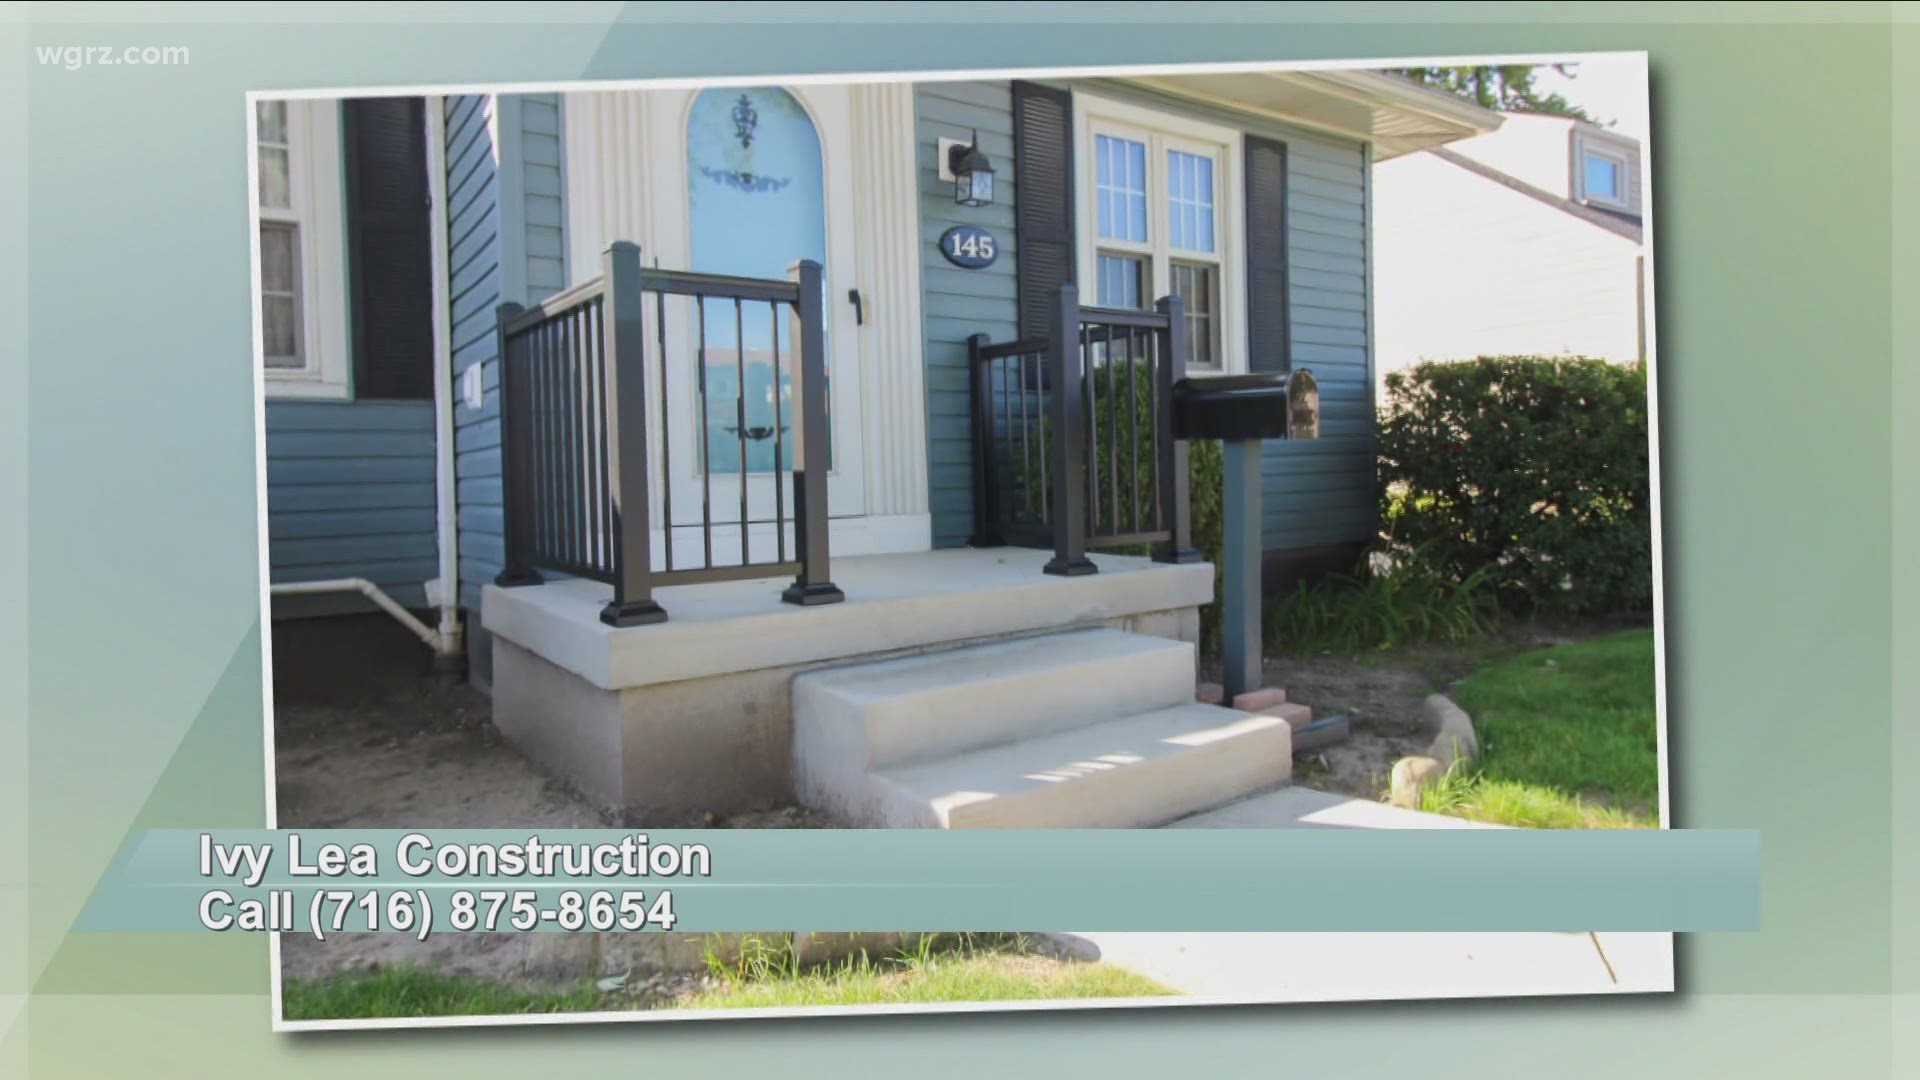 WNY Living - July 3 - Ivy Lea Construction (THIS VIDEO IS SPONSORED BY IVY LEA CONSTRUCTION)